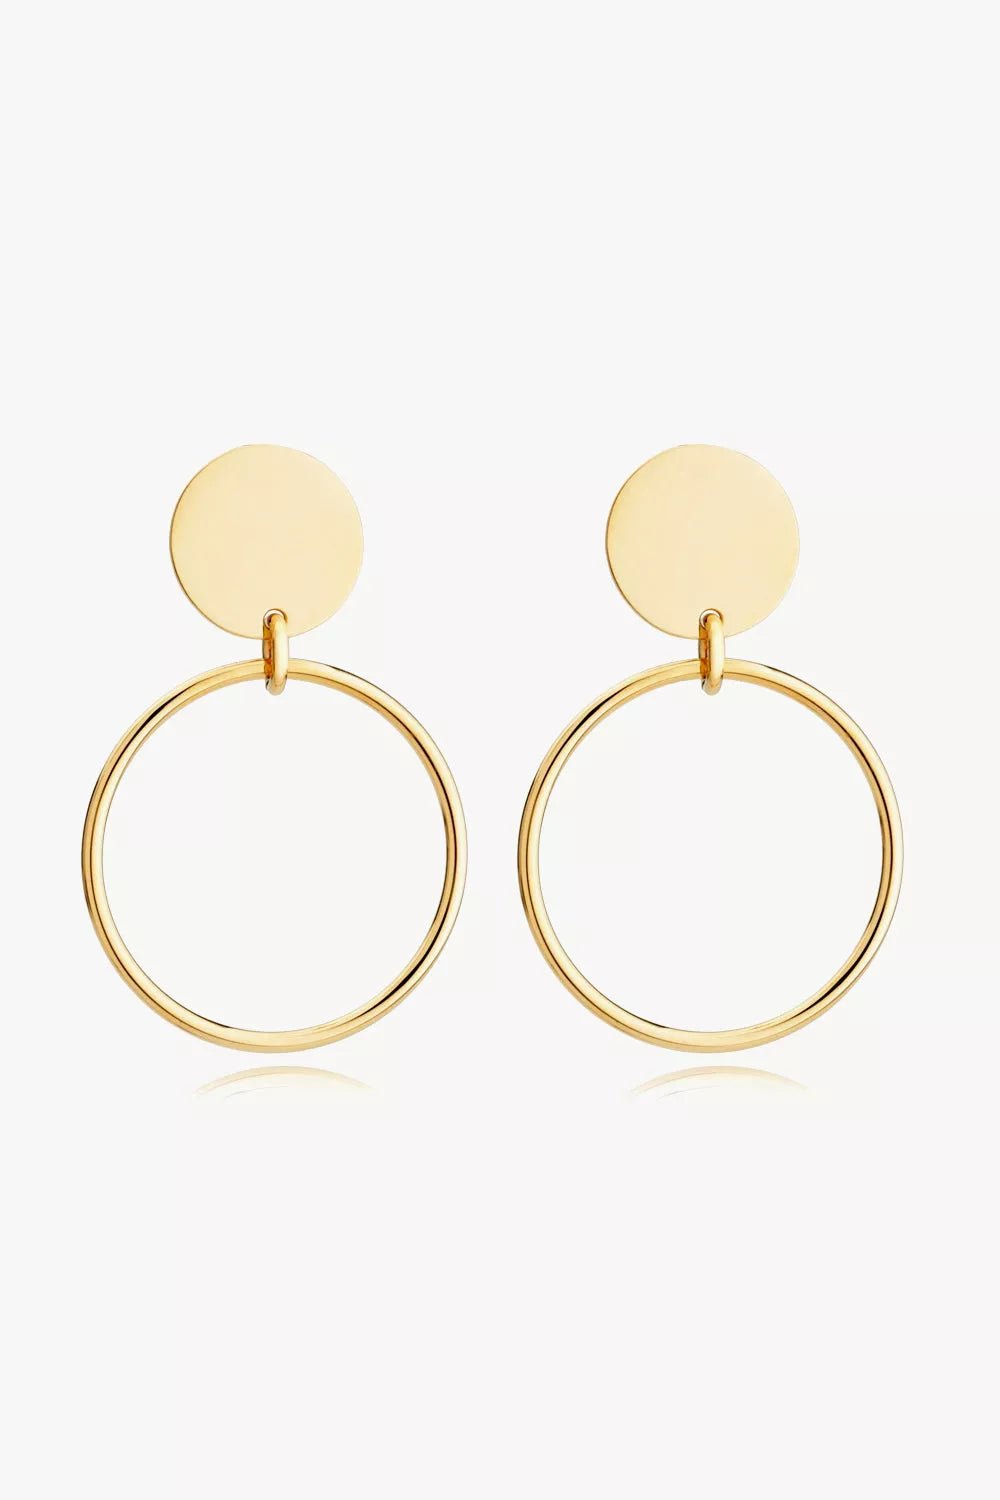 Gold-Plated Stainless Steel Drop Earrings - London's Closet Boutique